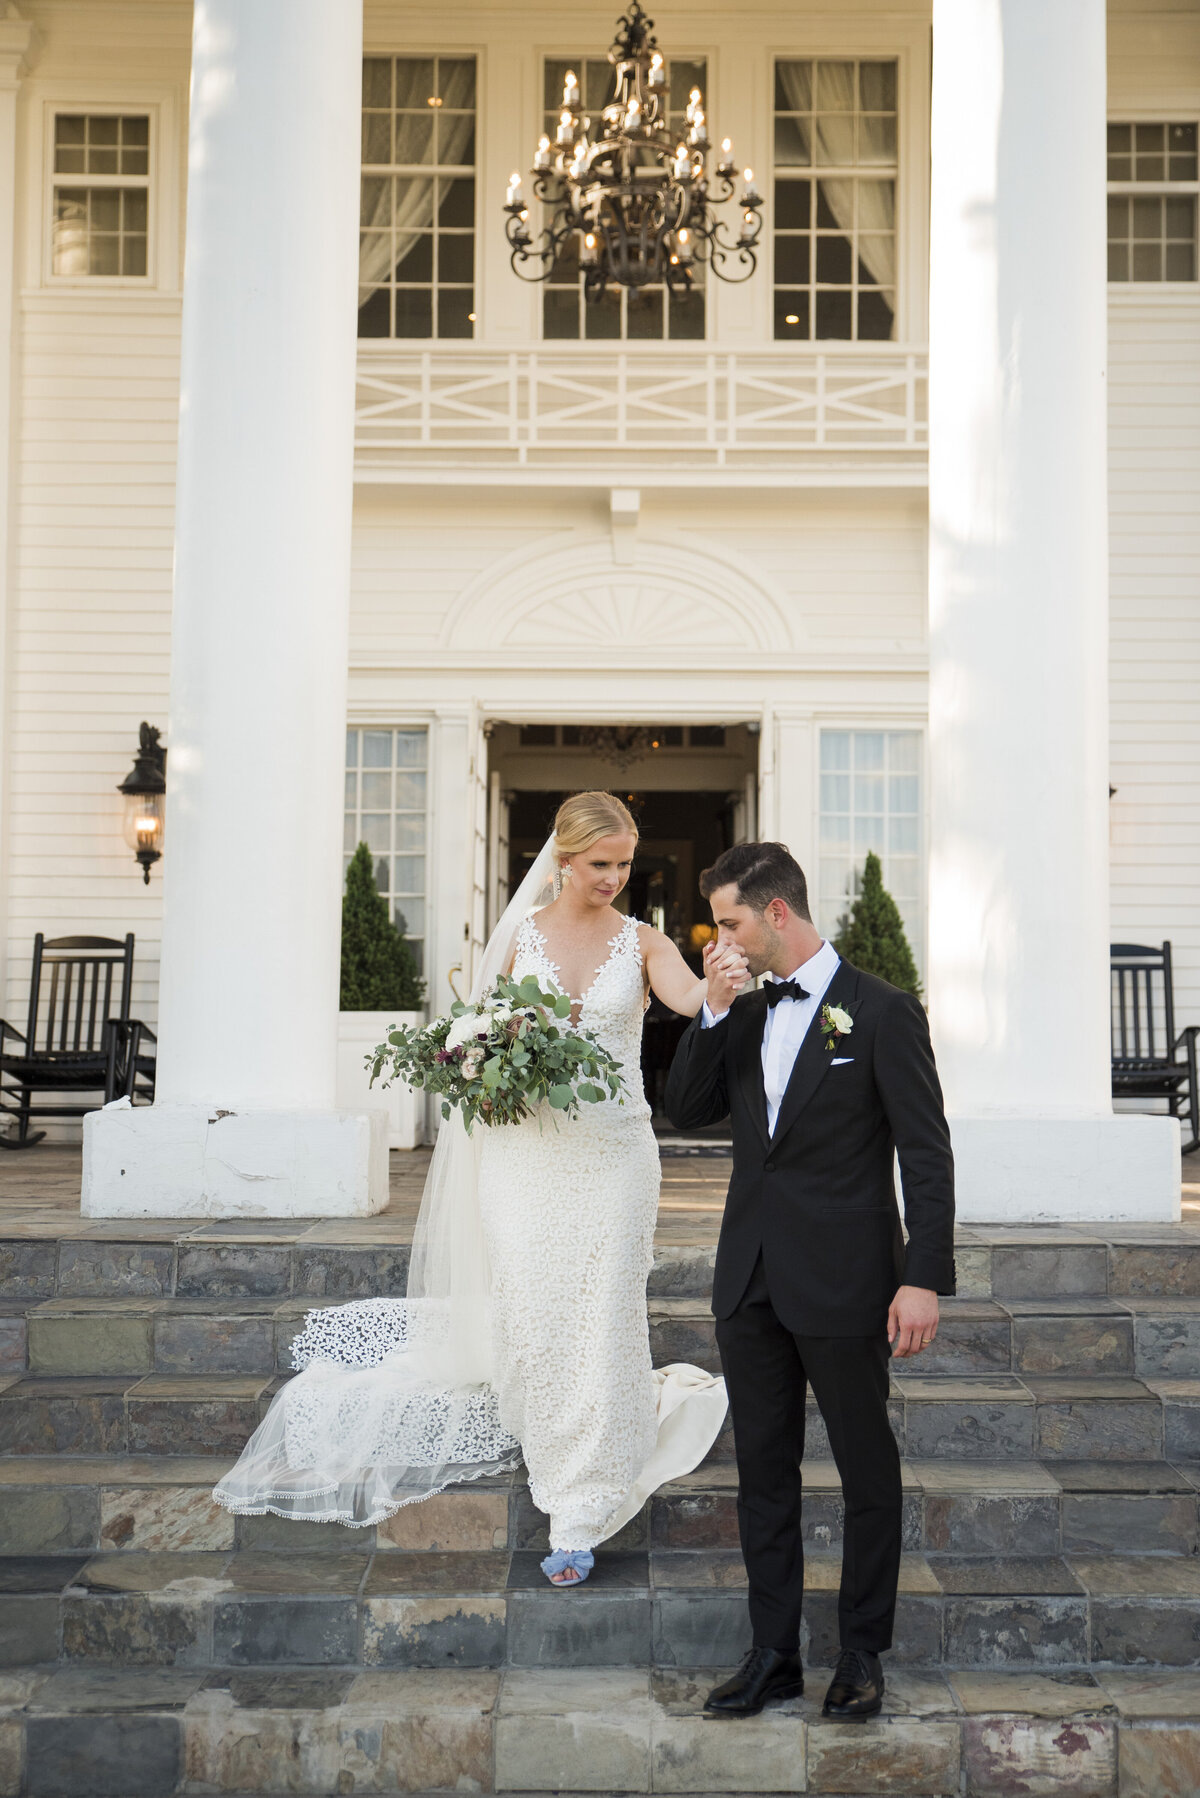 A groom leads his bride down the front steps of The Manor House and kisses her hand.